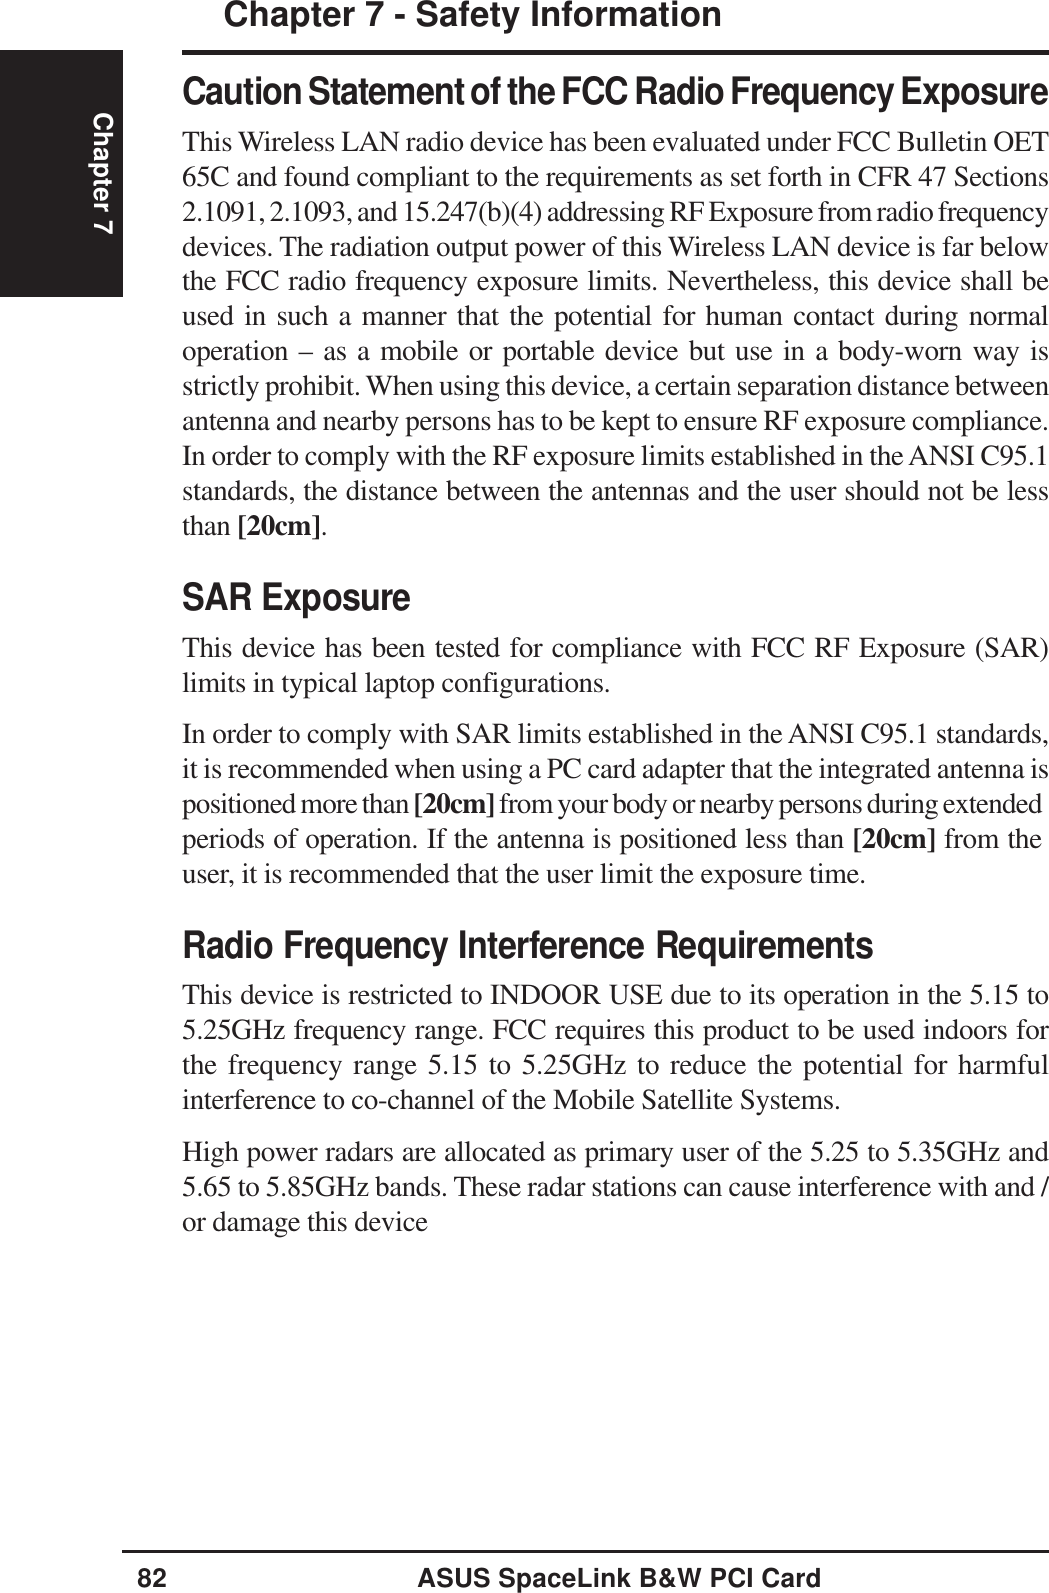 82 ASUS SpaceLink B&amp;W PCI CardChapter 7Chapter 7 - Safety InformationCaution Statement of the FCC Radio Frequency ExposureThis Wireless LAN radio device has been evaluated under FCC Bulletin OET65C and found compliant to the requirements as set forth in CFR 47 Sections2.1091, 2.1093, and 15.247(b)(4) addressing RF Exposure from radio frequencydevices. The radiation output power of this Wireless LAN device is far belowthe FCC radio frequency exposure limits. Nevertheless, this device shall beused in such a manner that the potential for human contact during normaloperation – as a mobile or portable device but use in a body-worn way isstrictly prohibit. When using this device, a certain separation distance betweenantenna and nearby persons has to be kept to ensure RF exposure compliance.In order to comply with the RF exposure limits established in the ANSI C95.1standards, the distance between the antennas and the user should not be lessthan [20cm].SAR ExposureThis device has been tested for compliance with FCC RF Exposure (SAR)limits in typical laptop configurations.In order to comply with SAR limits established in the ANSI C95.1 standards,it is recommended when using a PC card adapter that the integrated antenna ispositioned more than [20cm] from your body or nearby persons during extendedperiods of operation. If the antenna is positioned less than [20cm] from theuser, it is recommended that the user limit the exposure time.Radio Frequency Interference RequirementsThis device is restricted to INDOOR USE due to its operation in the 5.15 to5.25GHz frequency range. FCC requires this product to be used indoors forthe frequency range 5.15 to 5.25GHz to reduce the potential for harmfulinterference to co-channel of the Mobile Satellite Systems.High power radars are allocated as primary user of the 5.25 to 5.35GHz and5.65 to 5.85GHz bands. These radar stations can cause interference with and /or damage this device